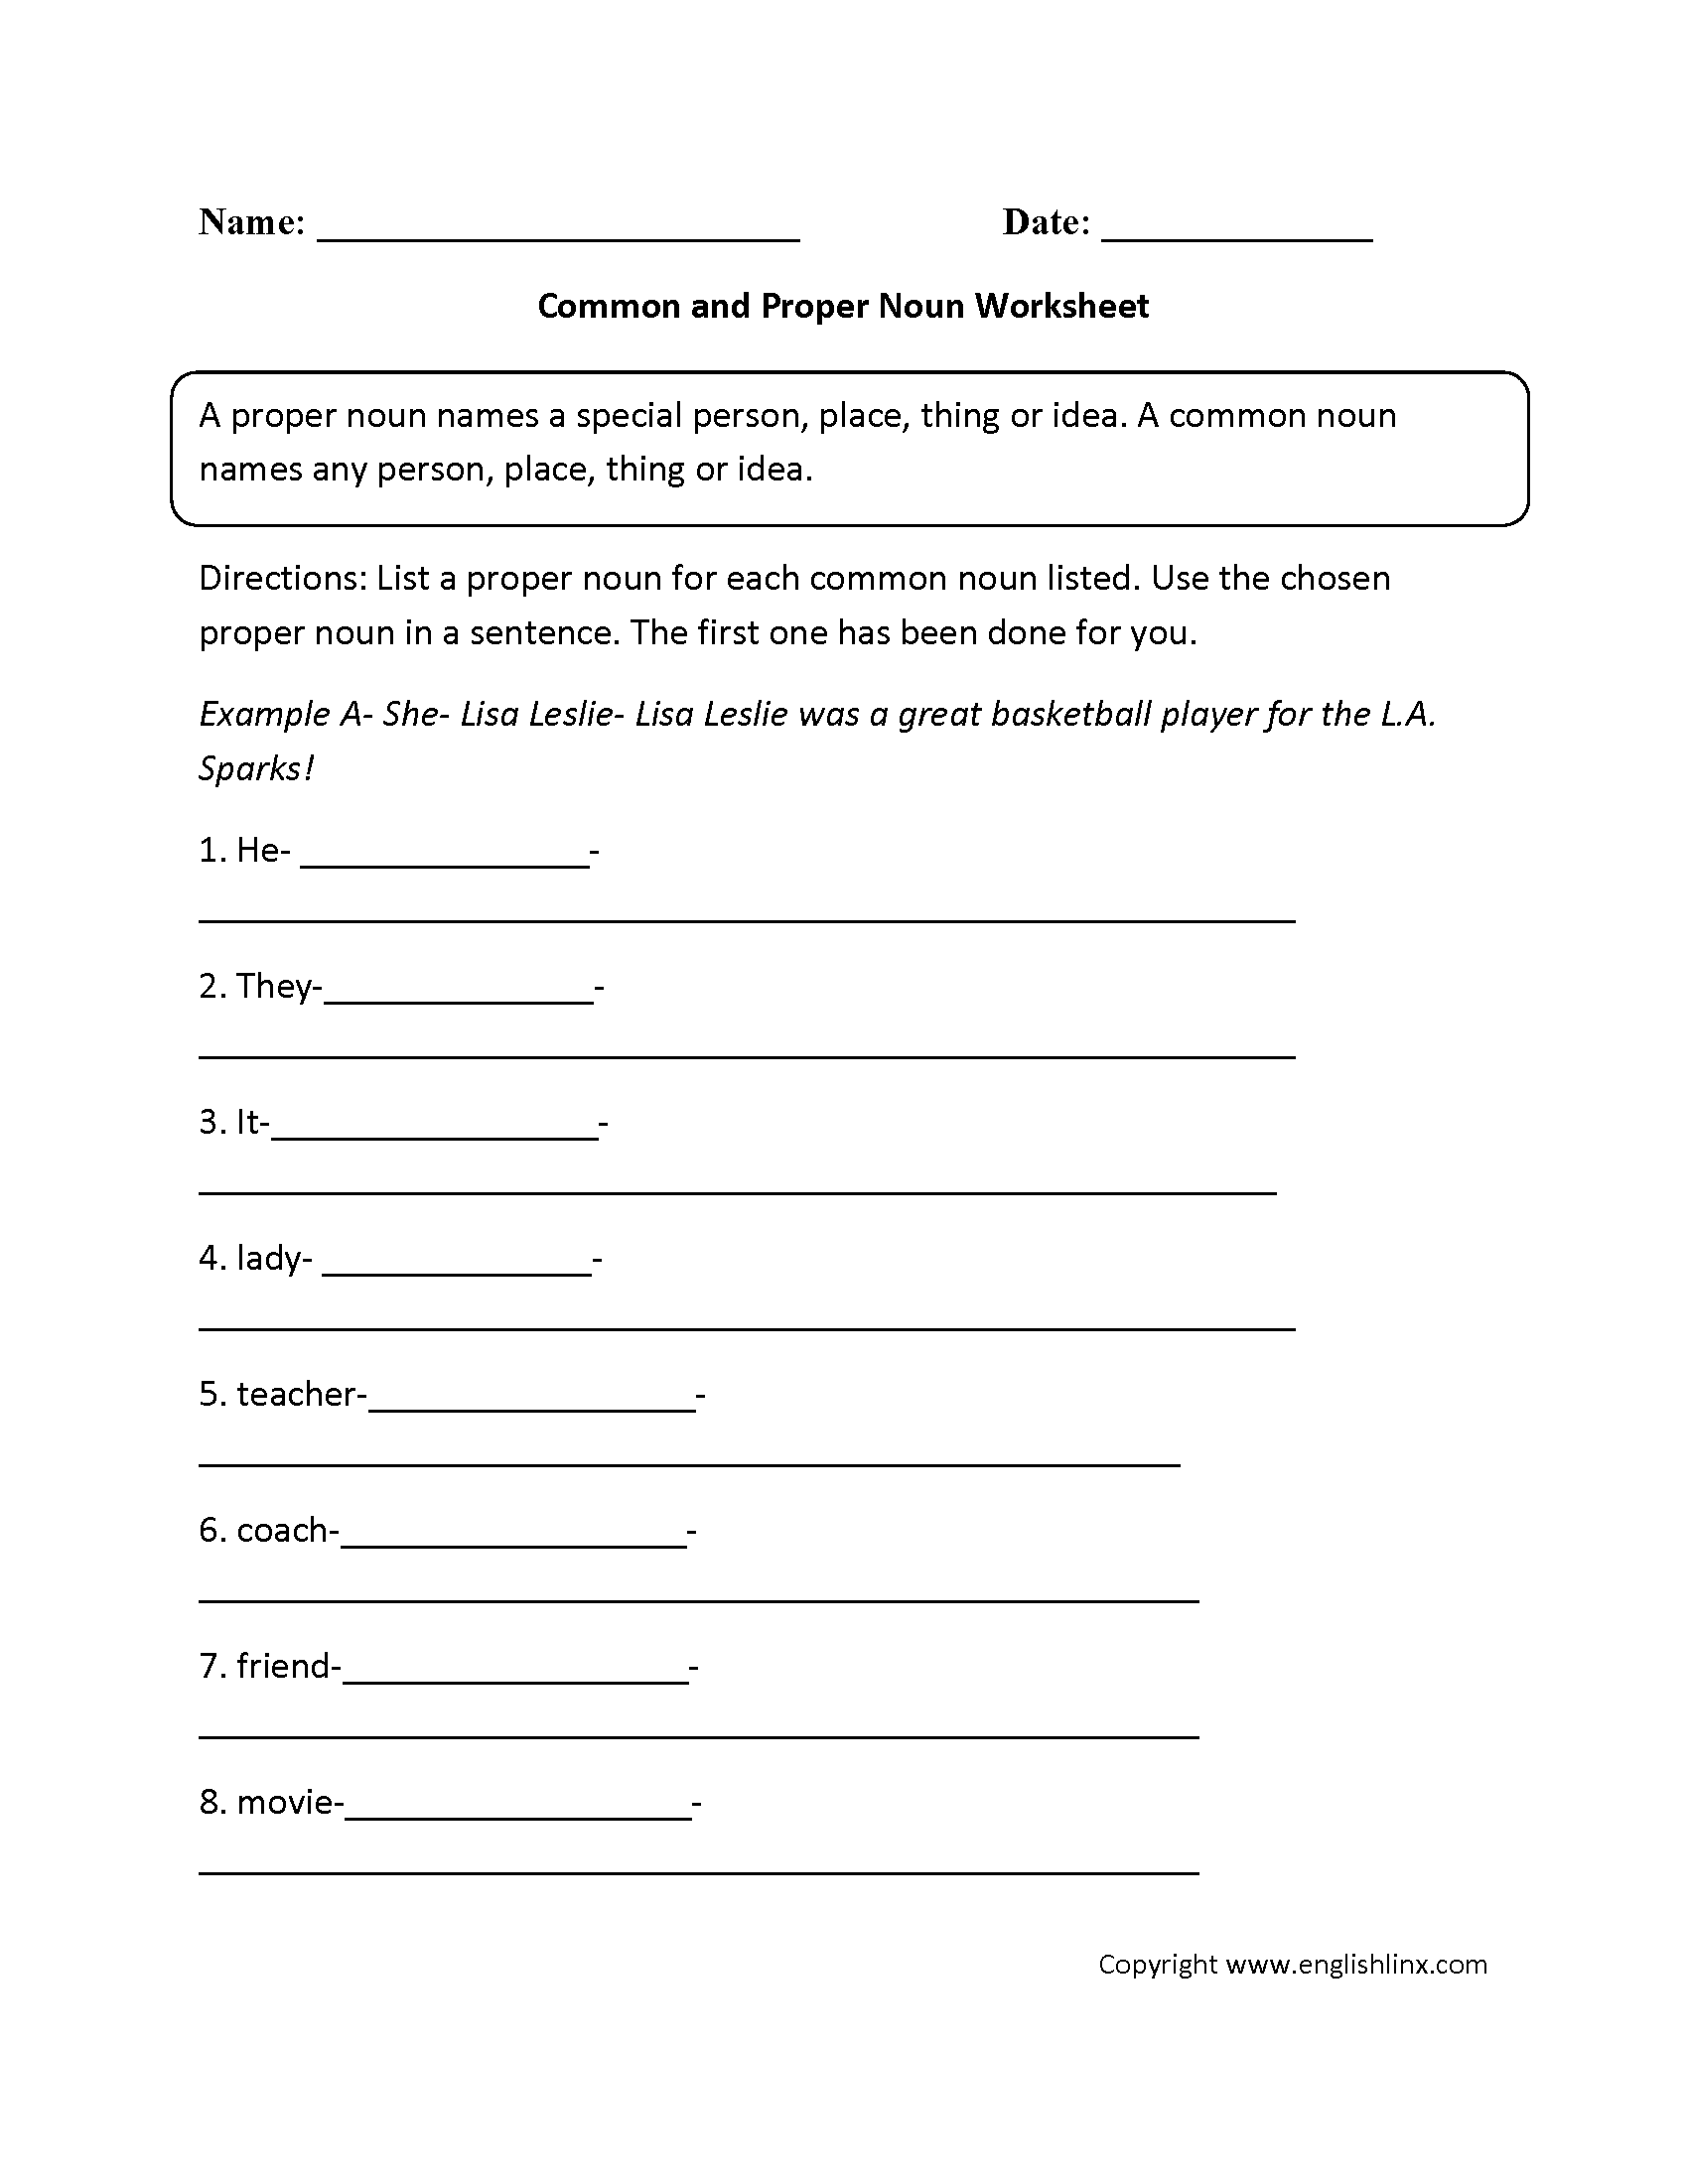 abstract-concrete-nouns-worksheet